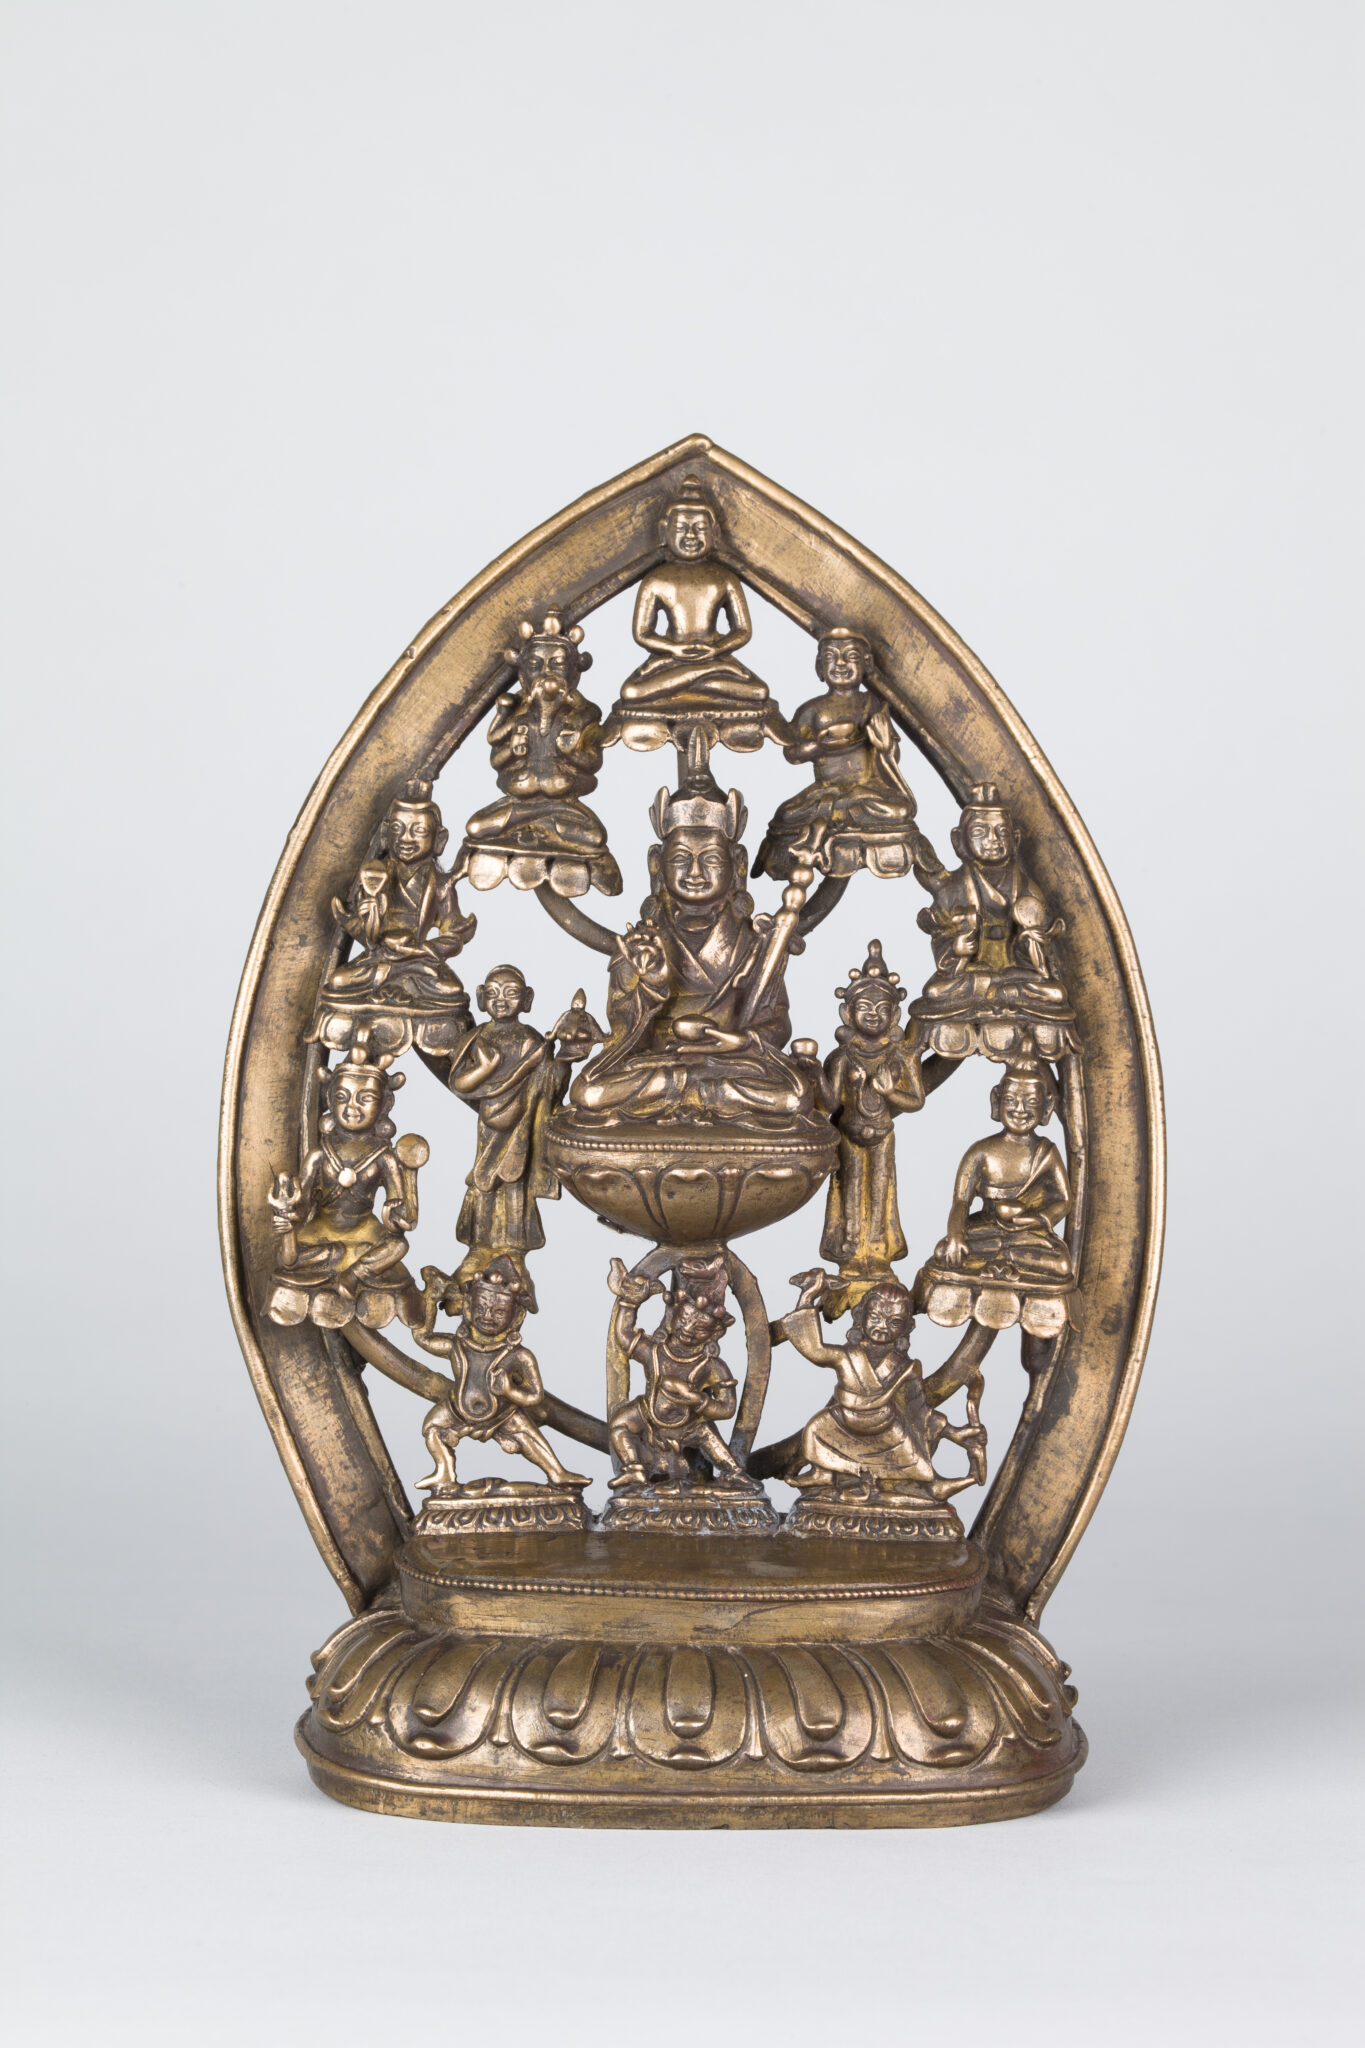 Copper sculpture featuring open, almond-shaped nimbus supporting seated holy man surrounded by twelve smaller figures